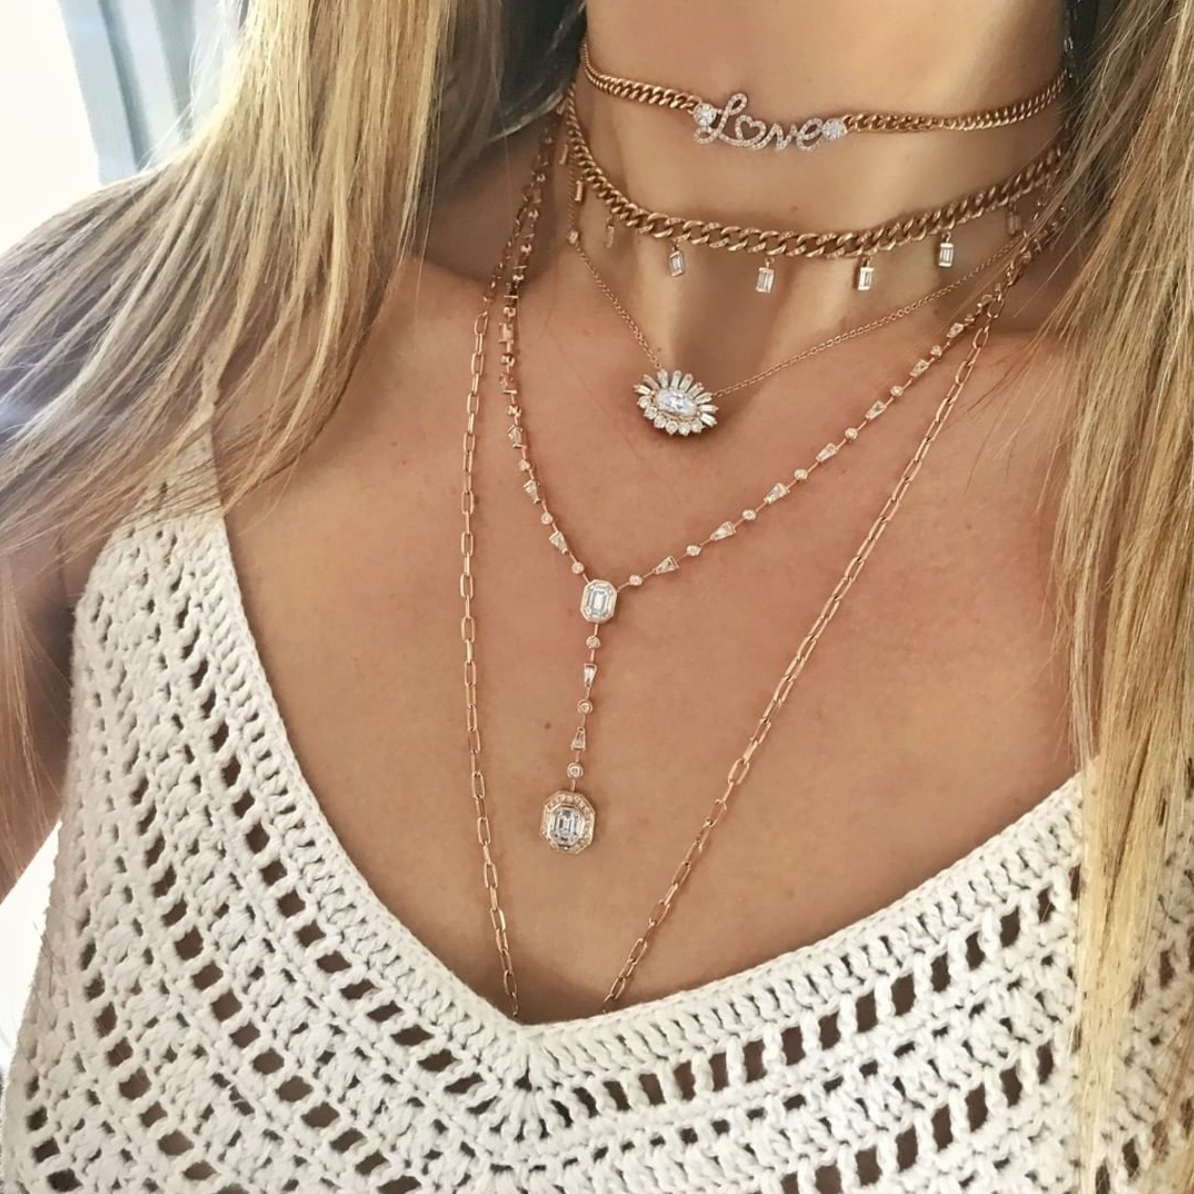 Long Y Necklace Wrap Around Necklace Gold Necklace Lariat Necklace Gold Y  Necklace Layering Necklace Y Necklace Long Necklace 